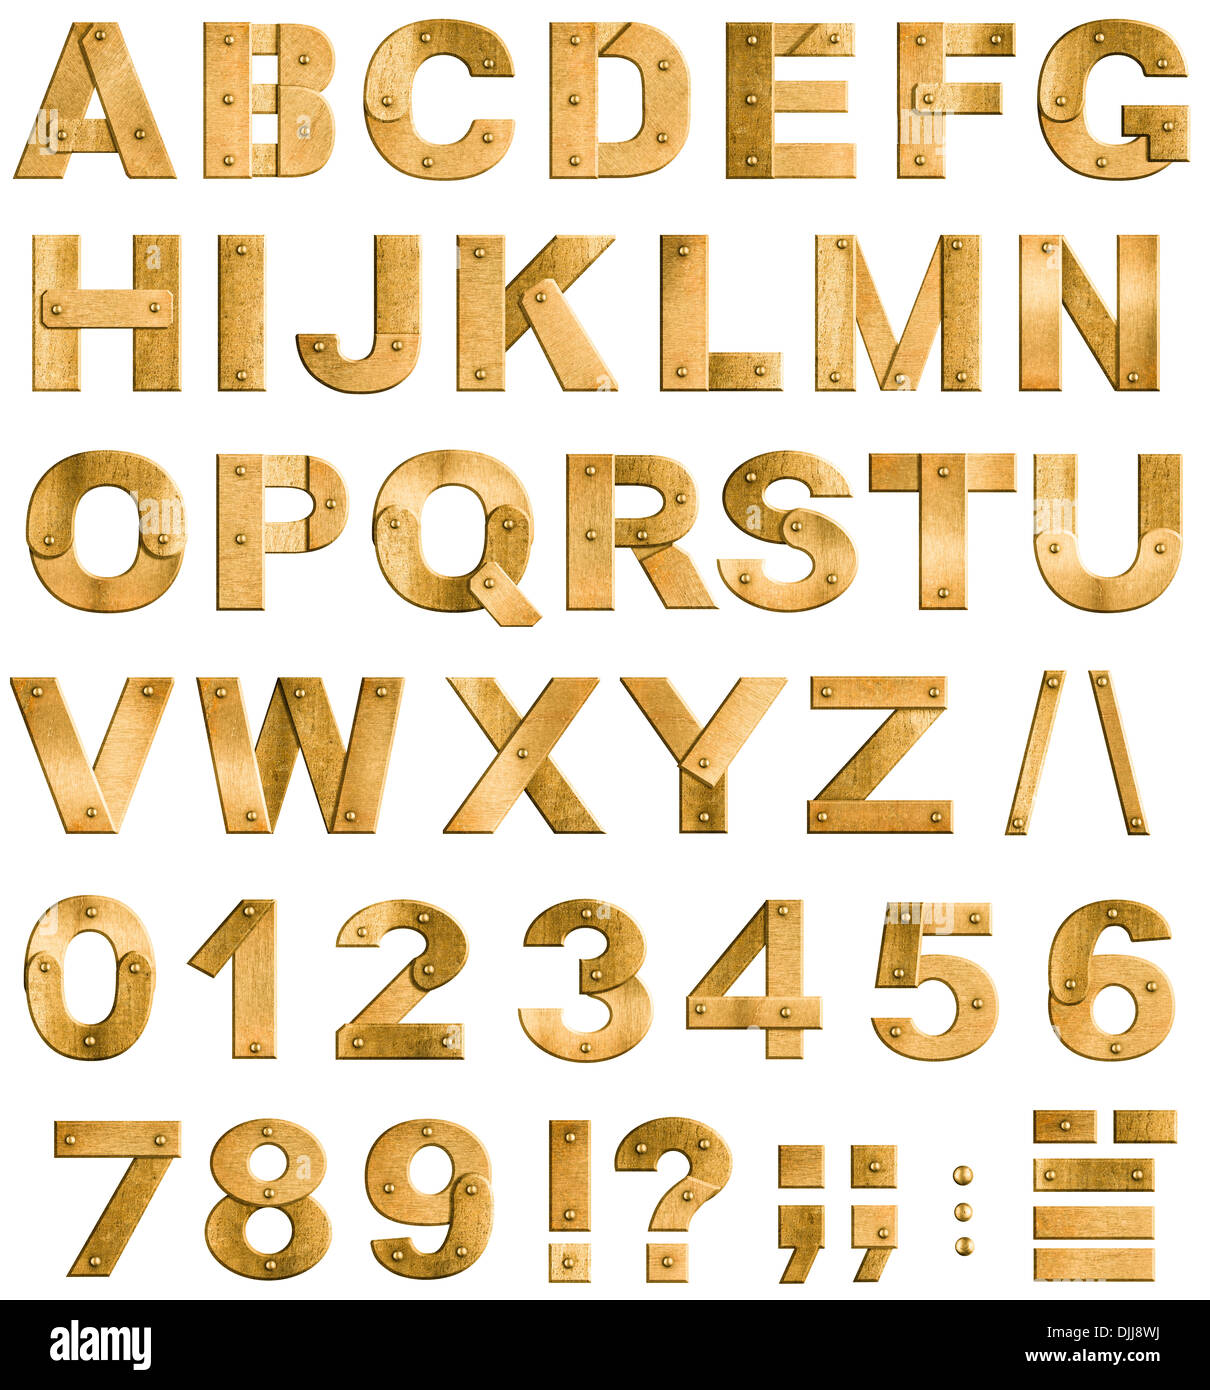 Golden or brass metal alphabet letters, digits and punctuation marks. Font isolated on white. Stock Photo